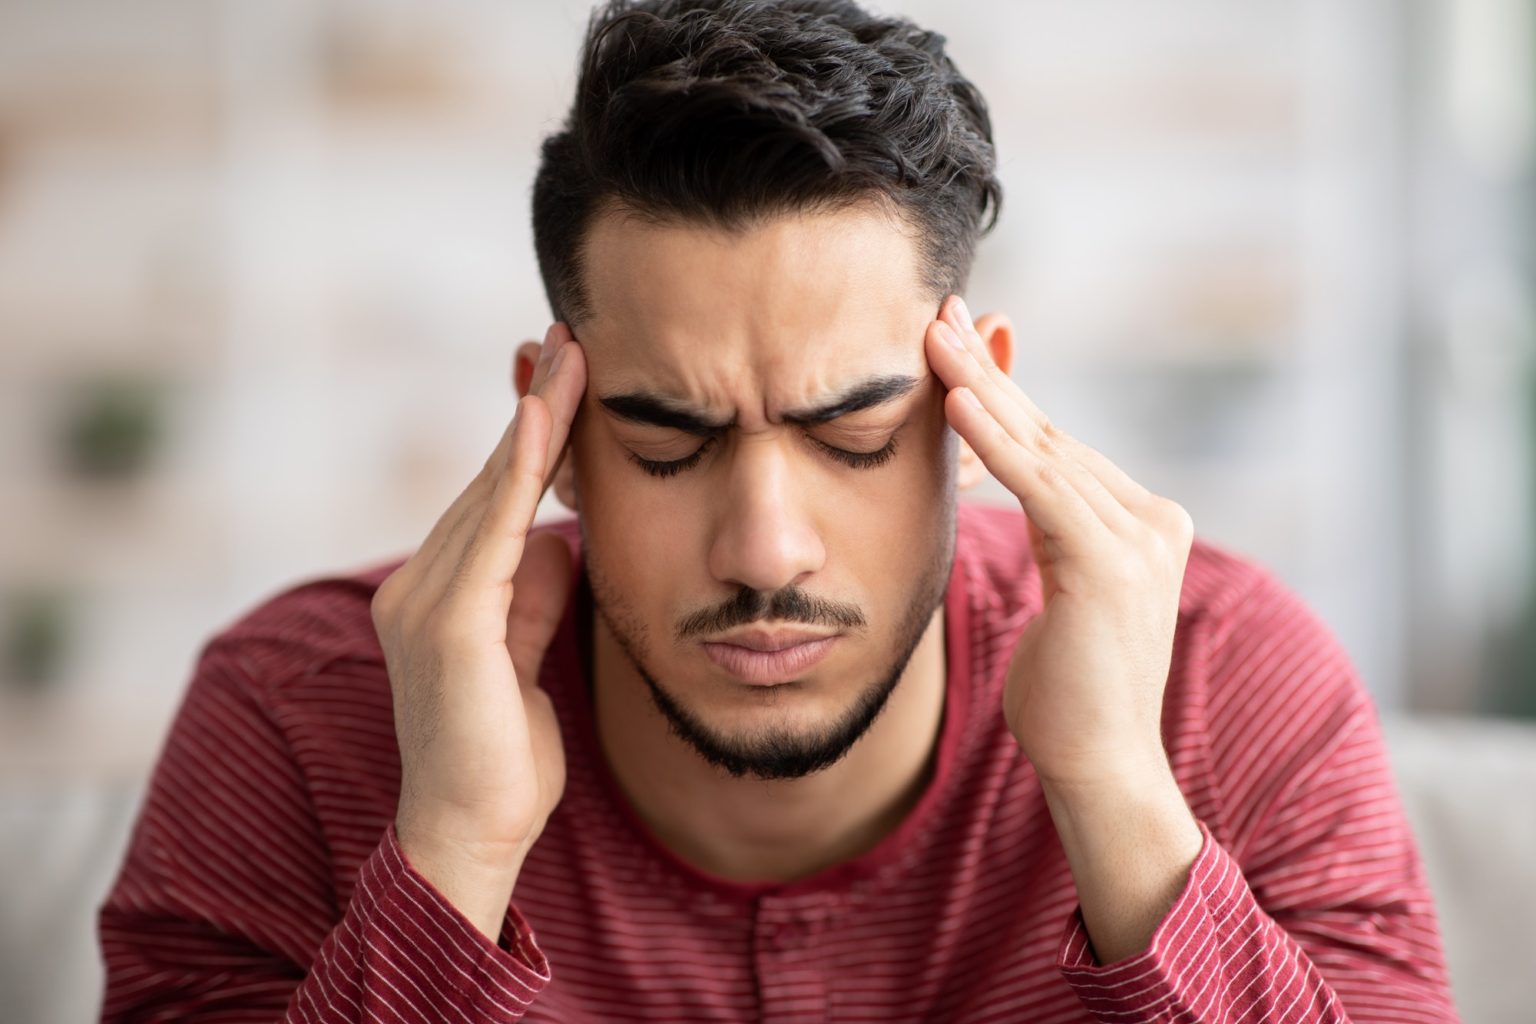 what Is a migraine?